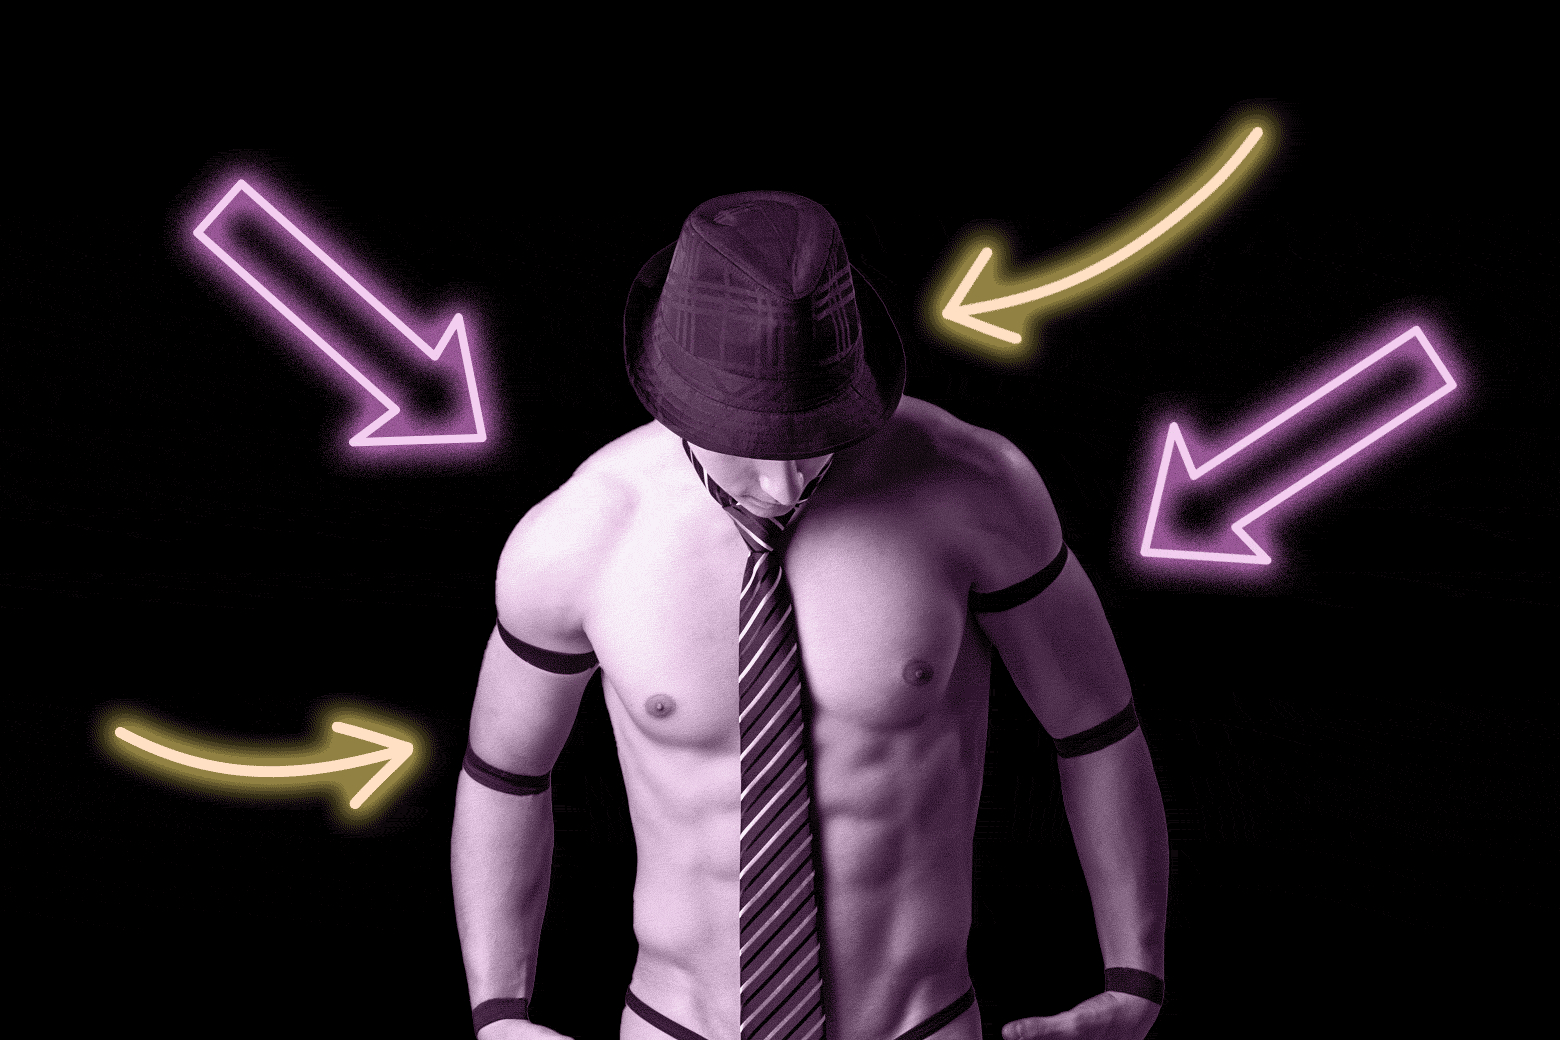 Male stripper wearing a fedora and tie. Several arrows point at him.